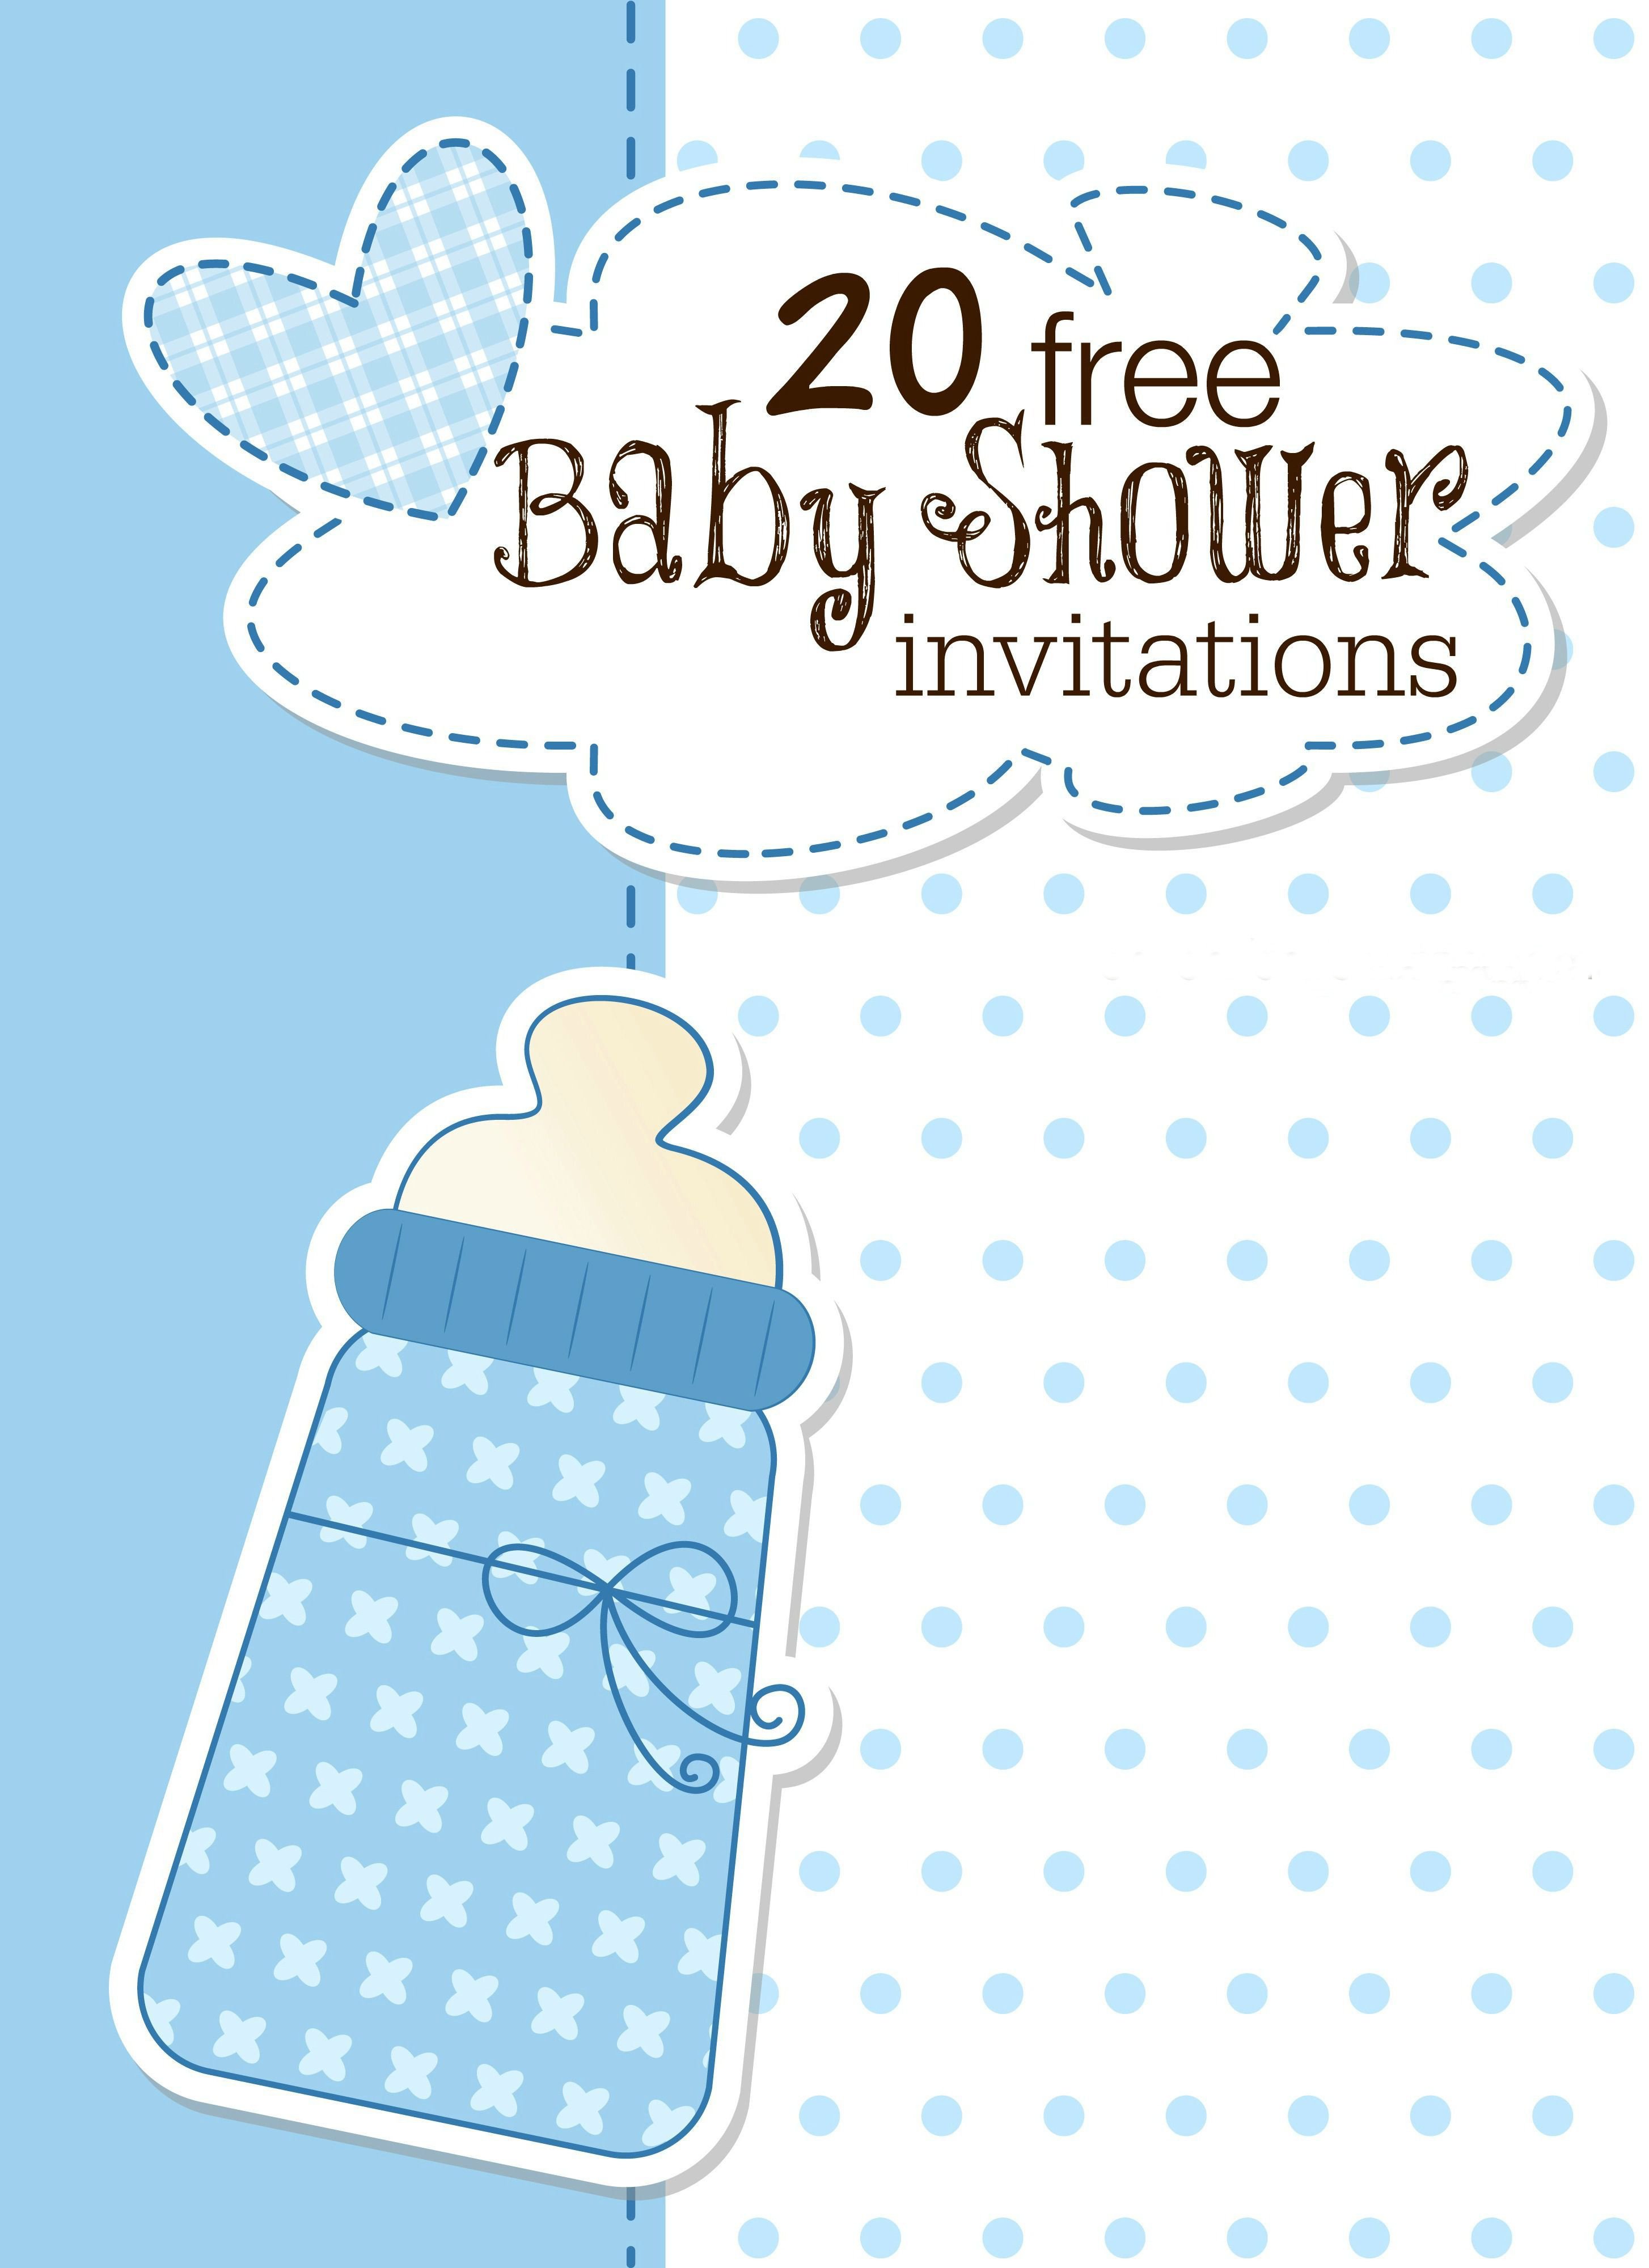 Free Shower Invitation Template Free Baby Invitation Template Free Baby Shower